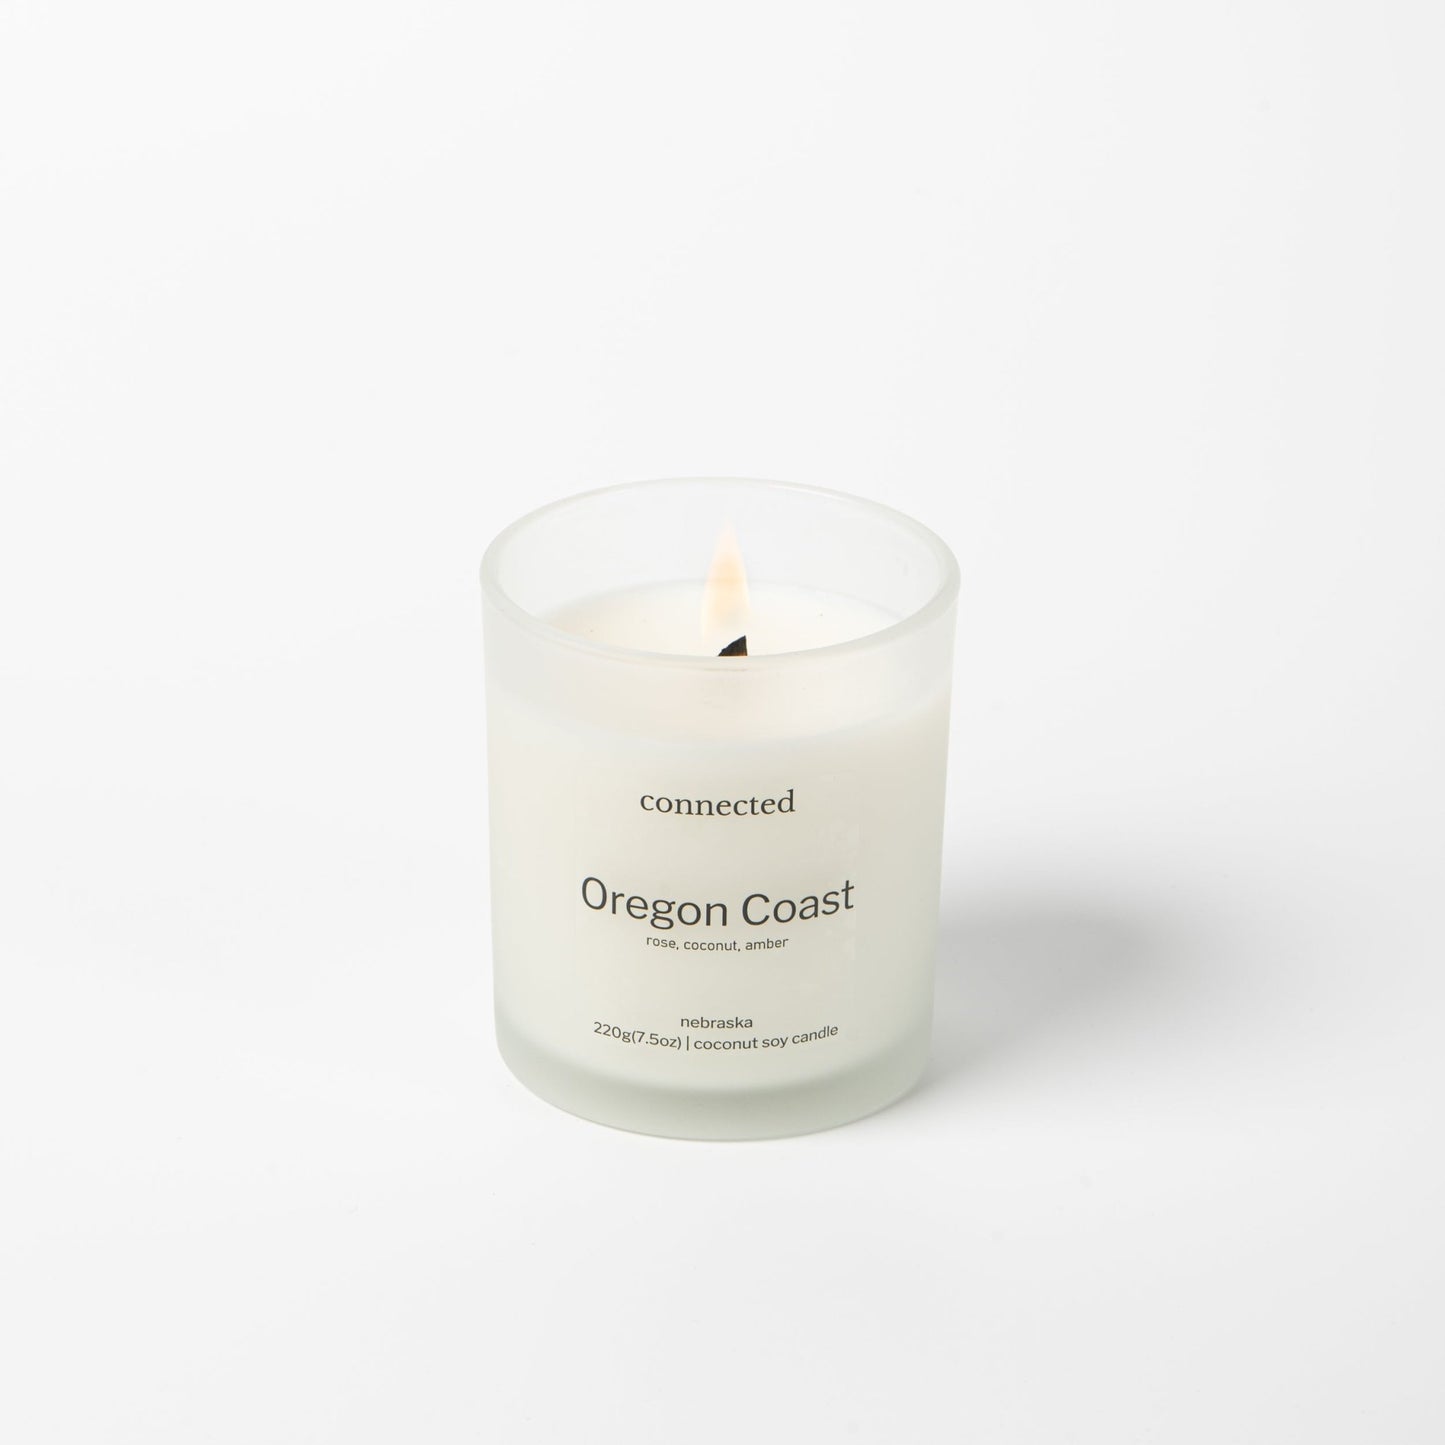 Oregon Coast -Coconut soy candle - Connected Fragrance Company - Connected